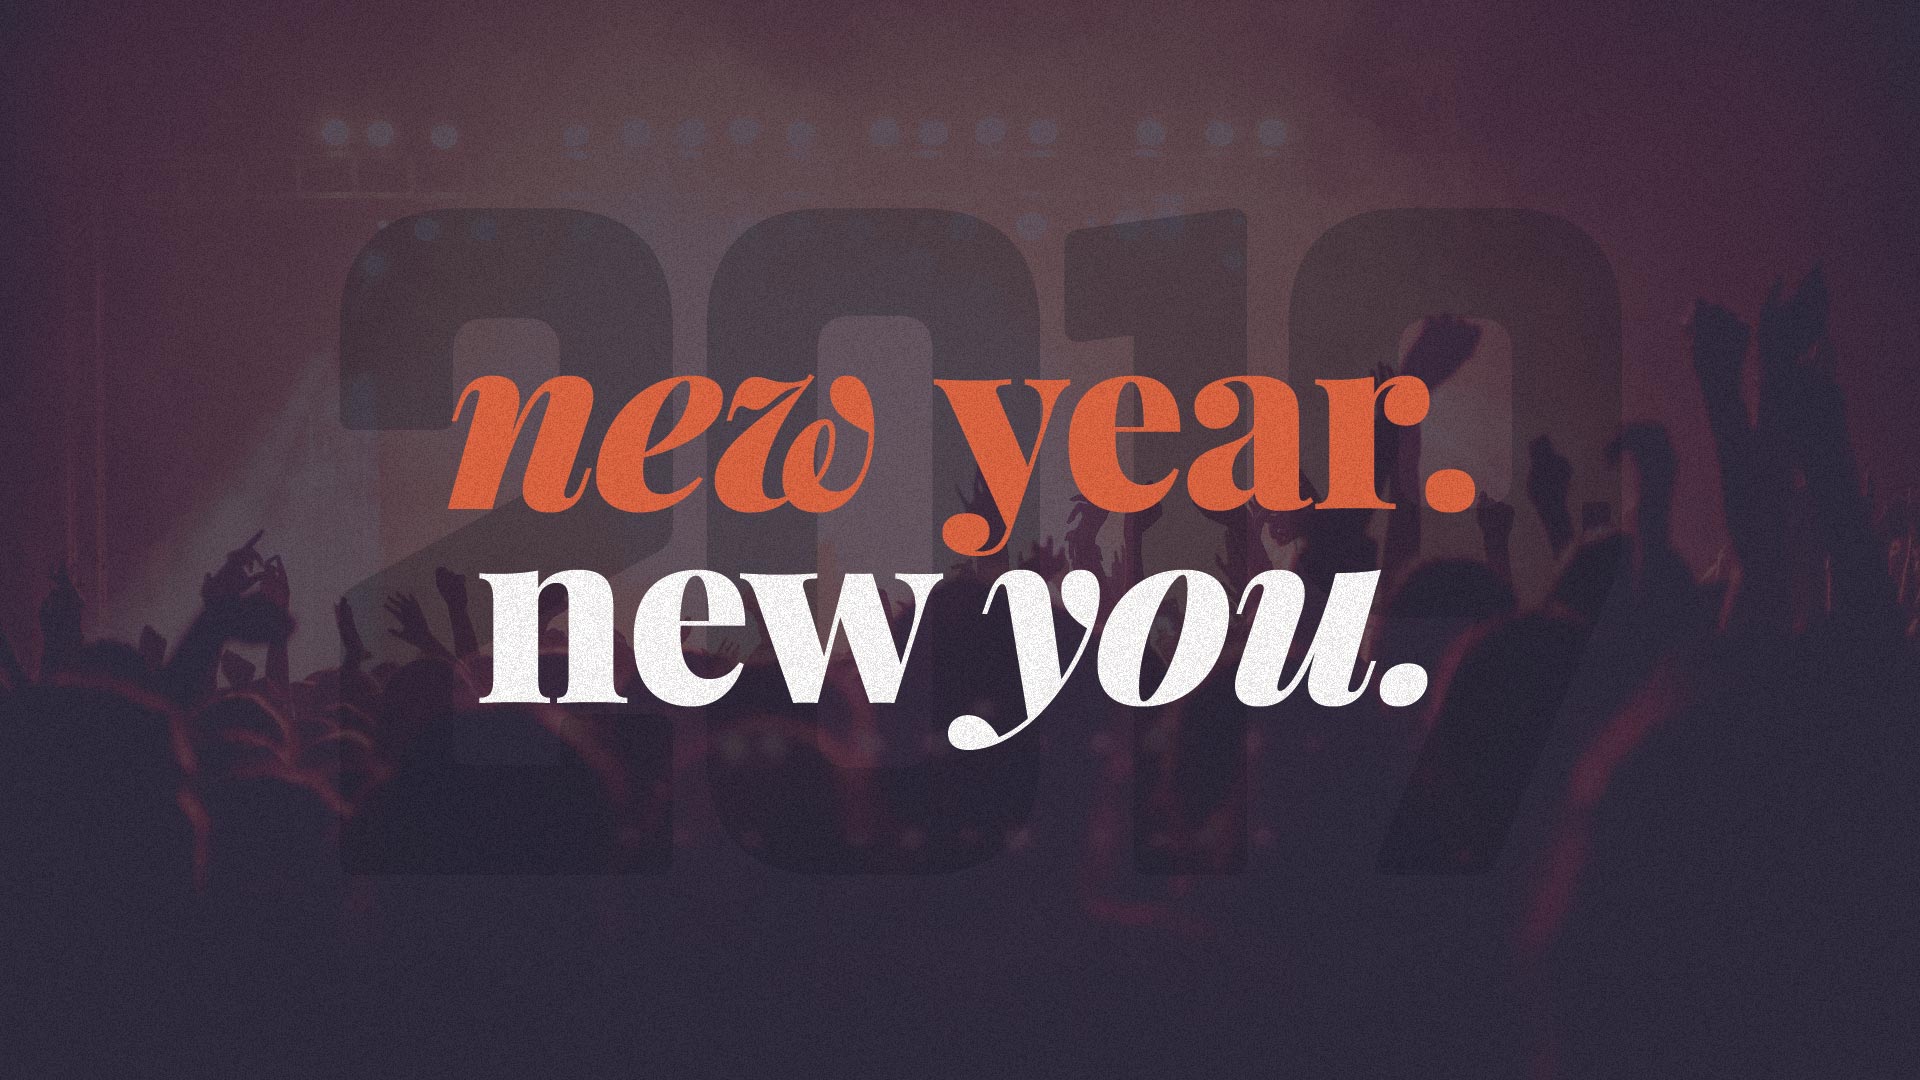 "New Year. New You." Message Series